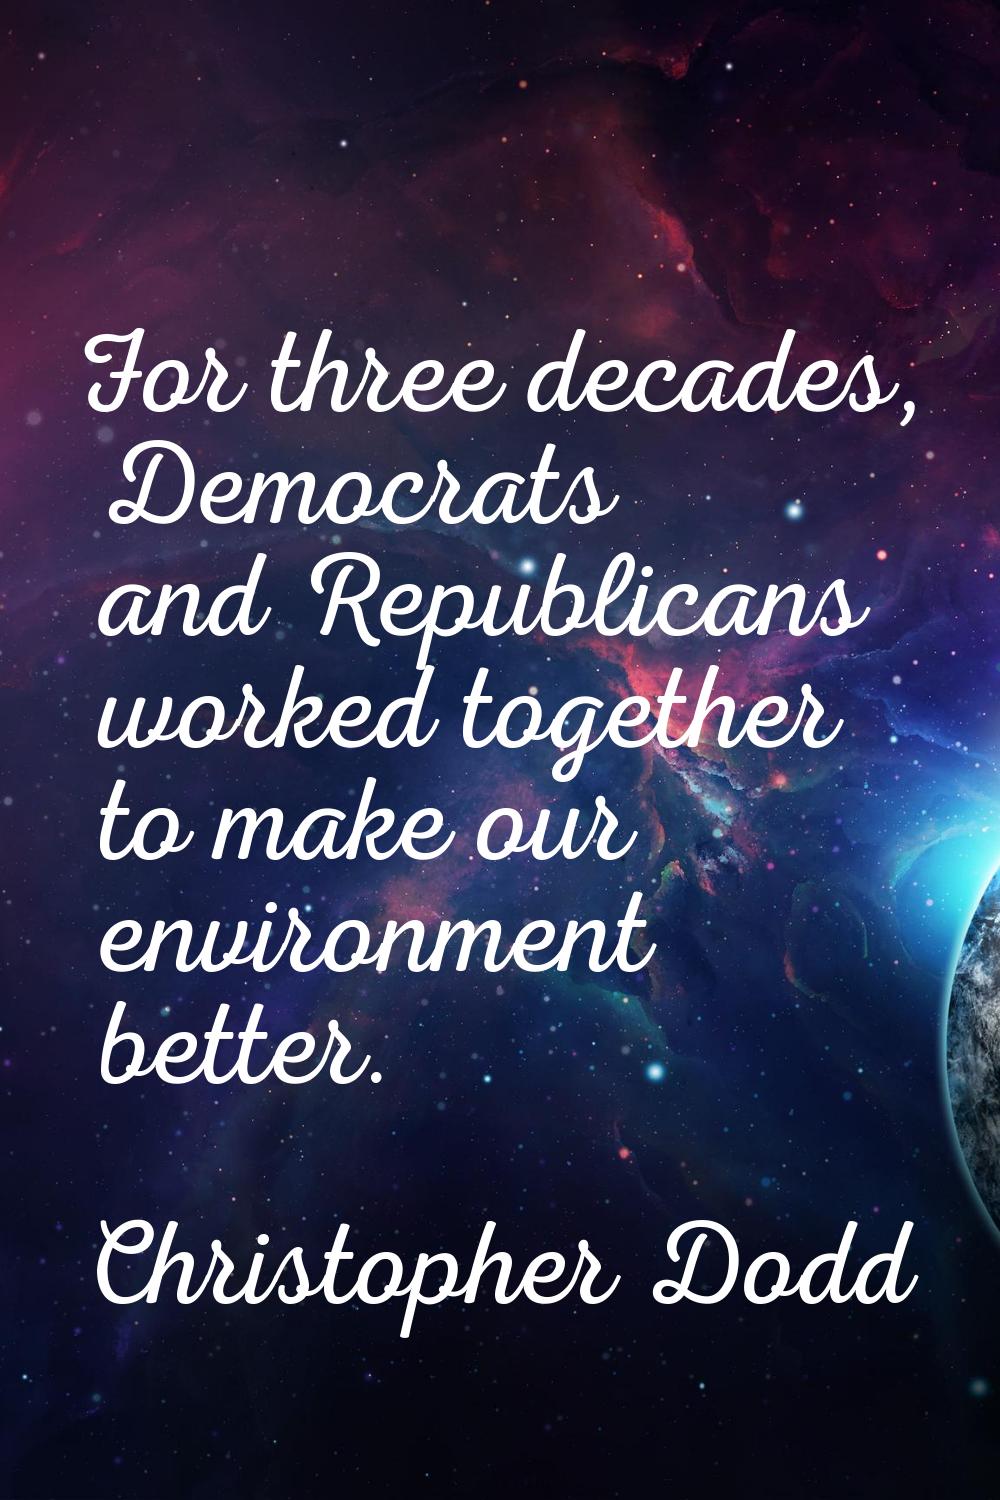 For three decades, Democrats and Republicans worked together to make our environment better.